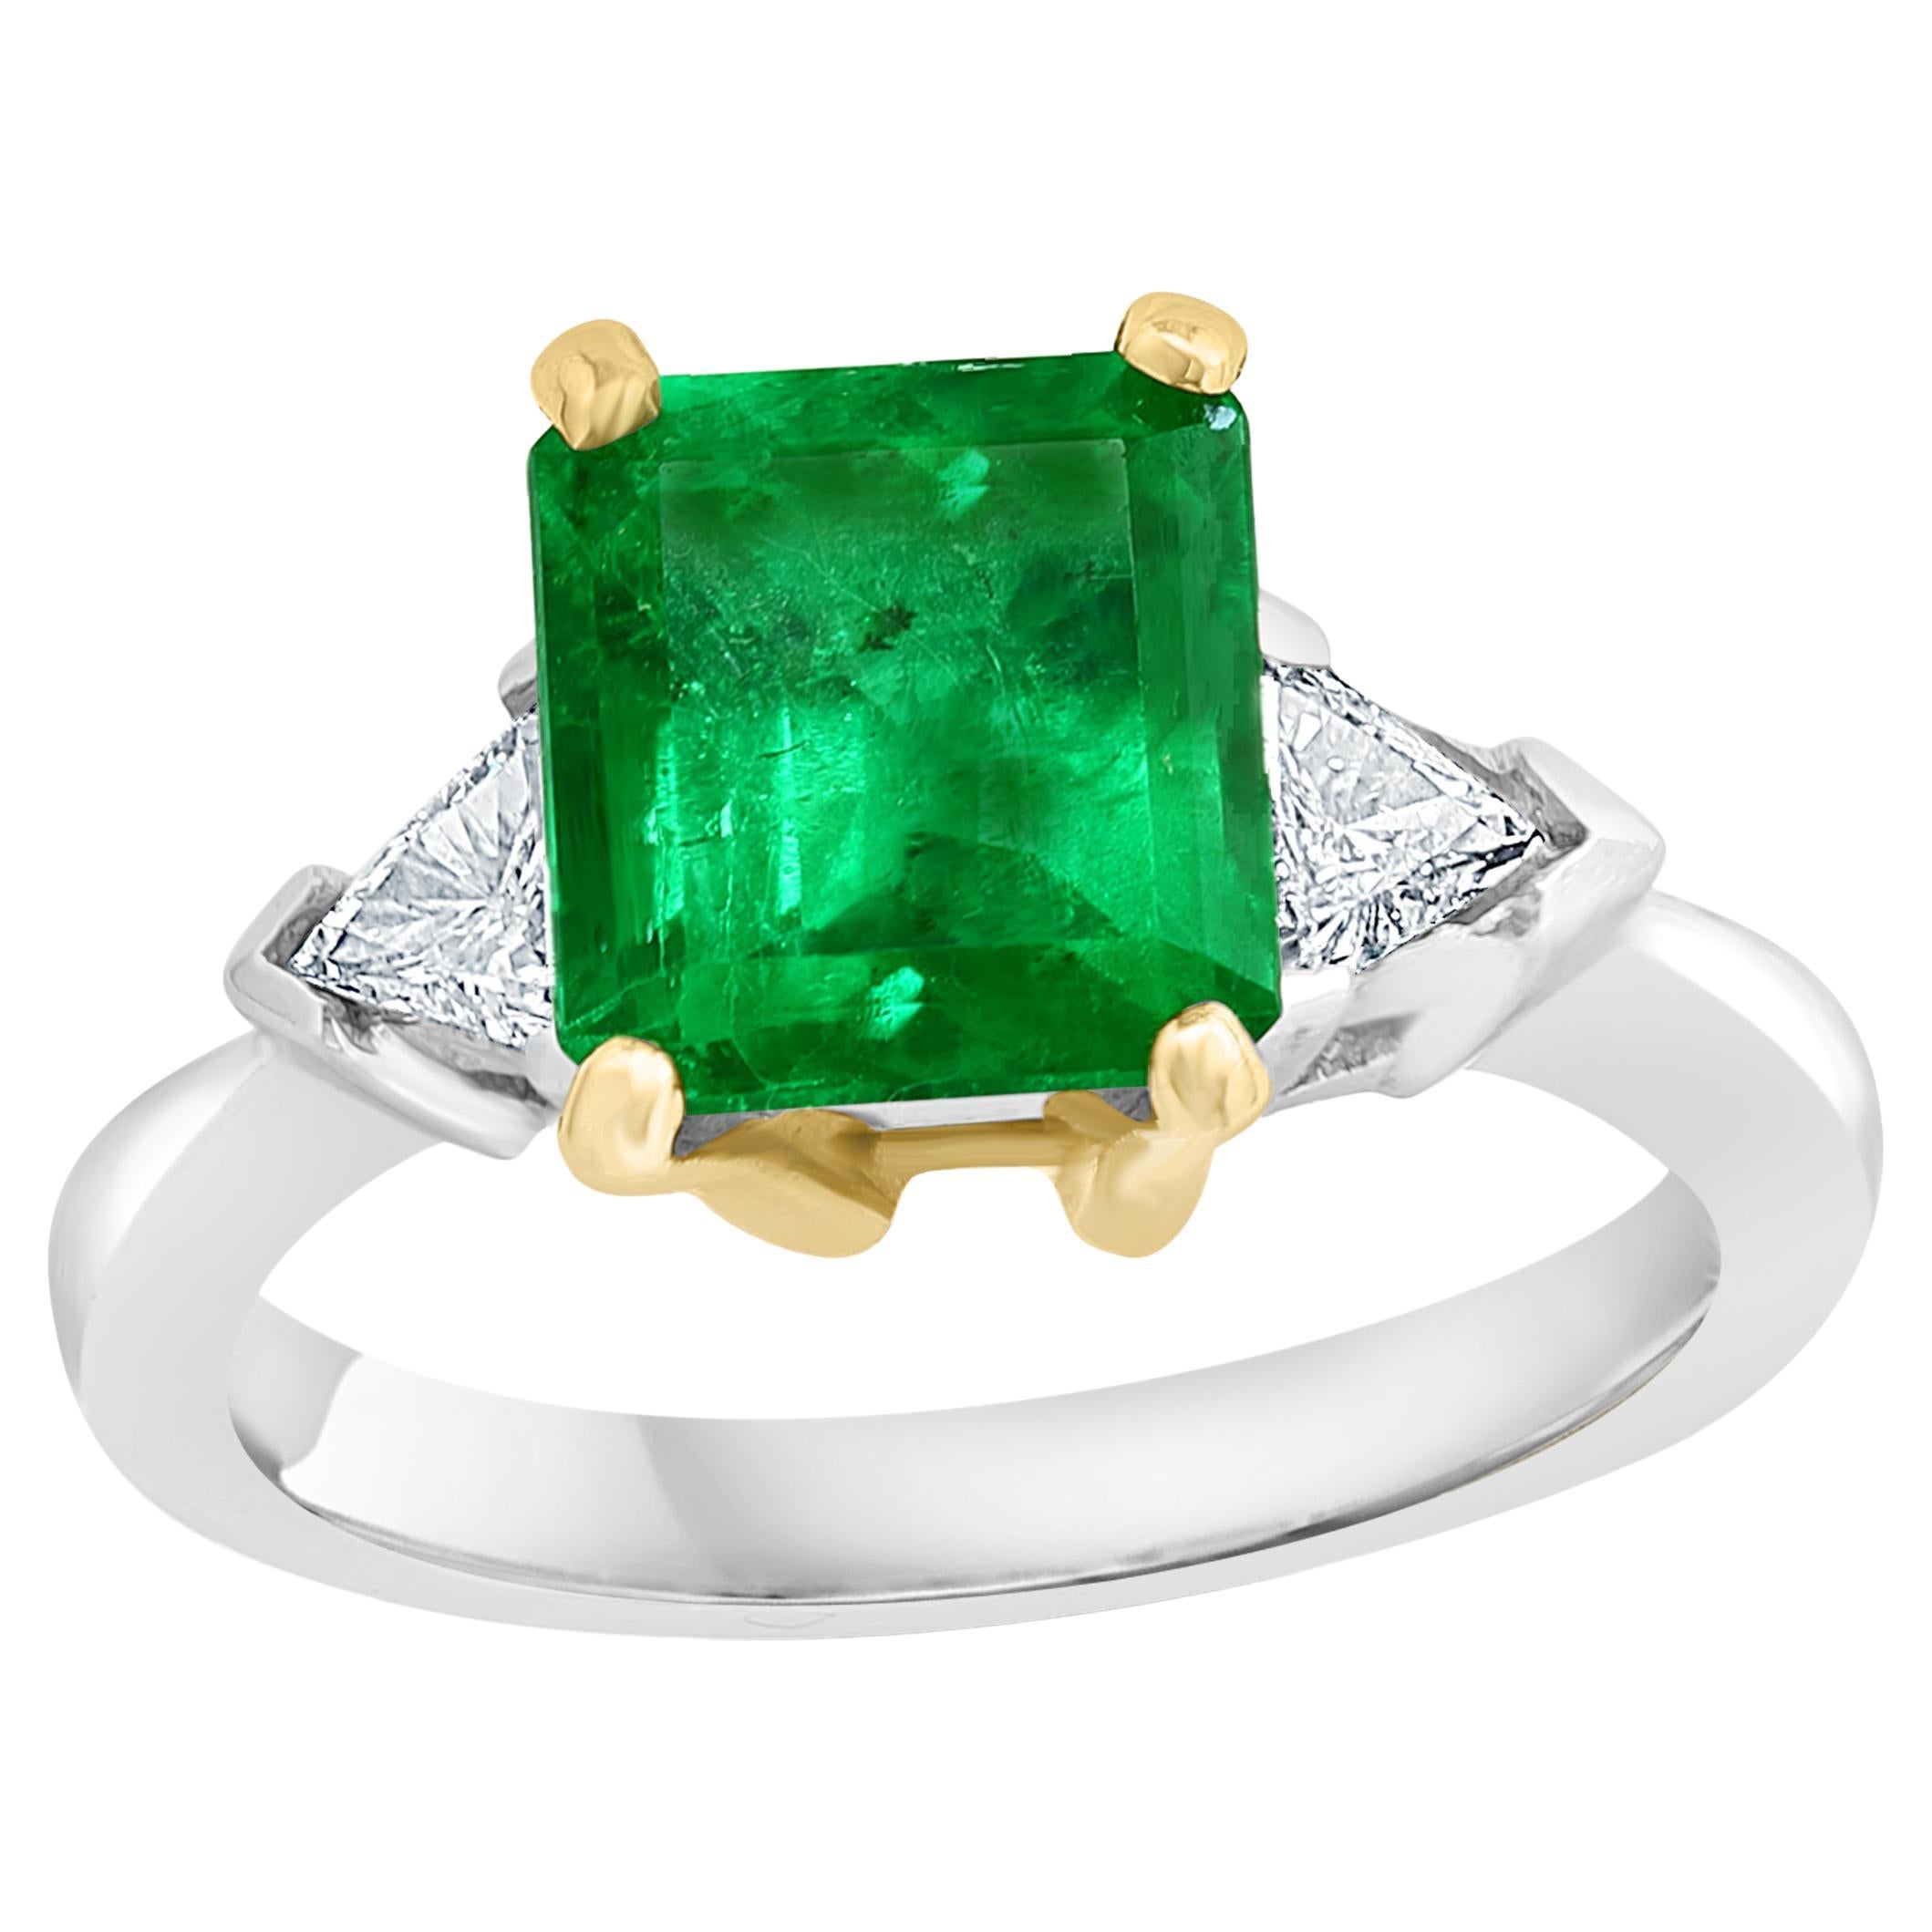 2.7 Carat Emerald Cut Colombian Emerald & 0.60Ct Diamond Ring 18K White/Y Gold For Sale